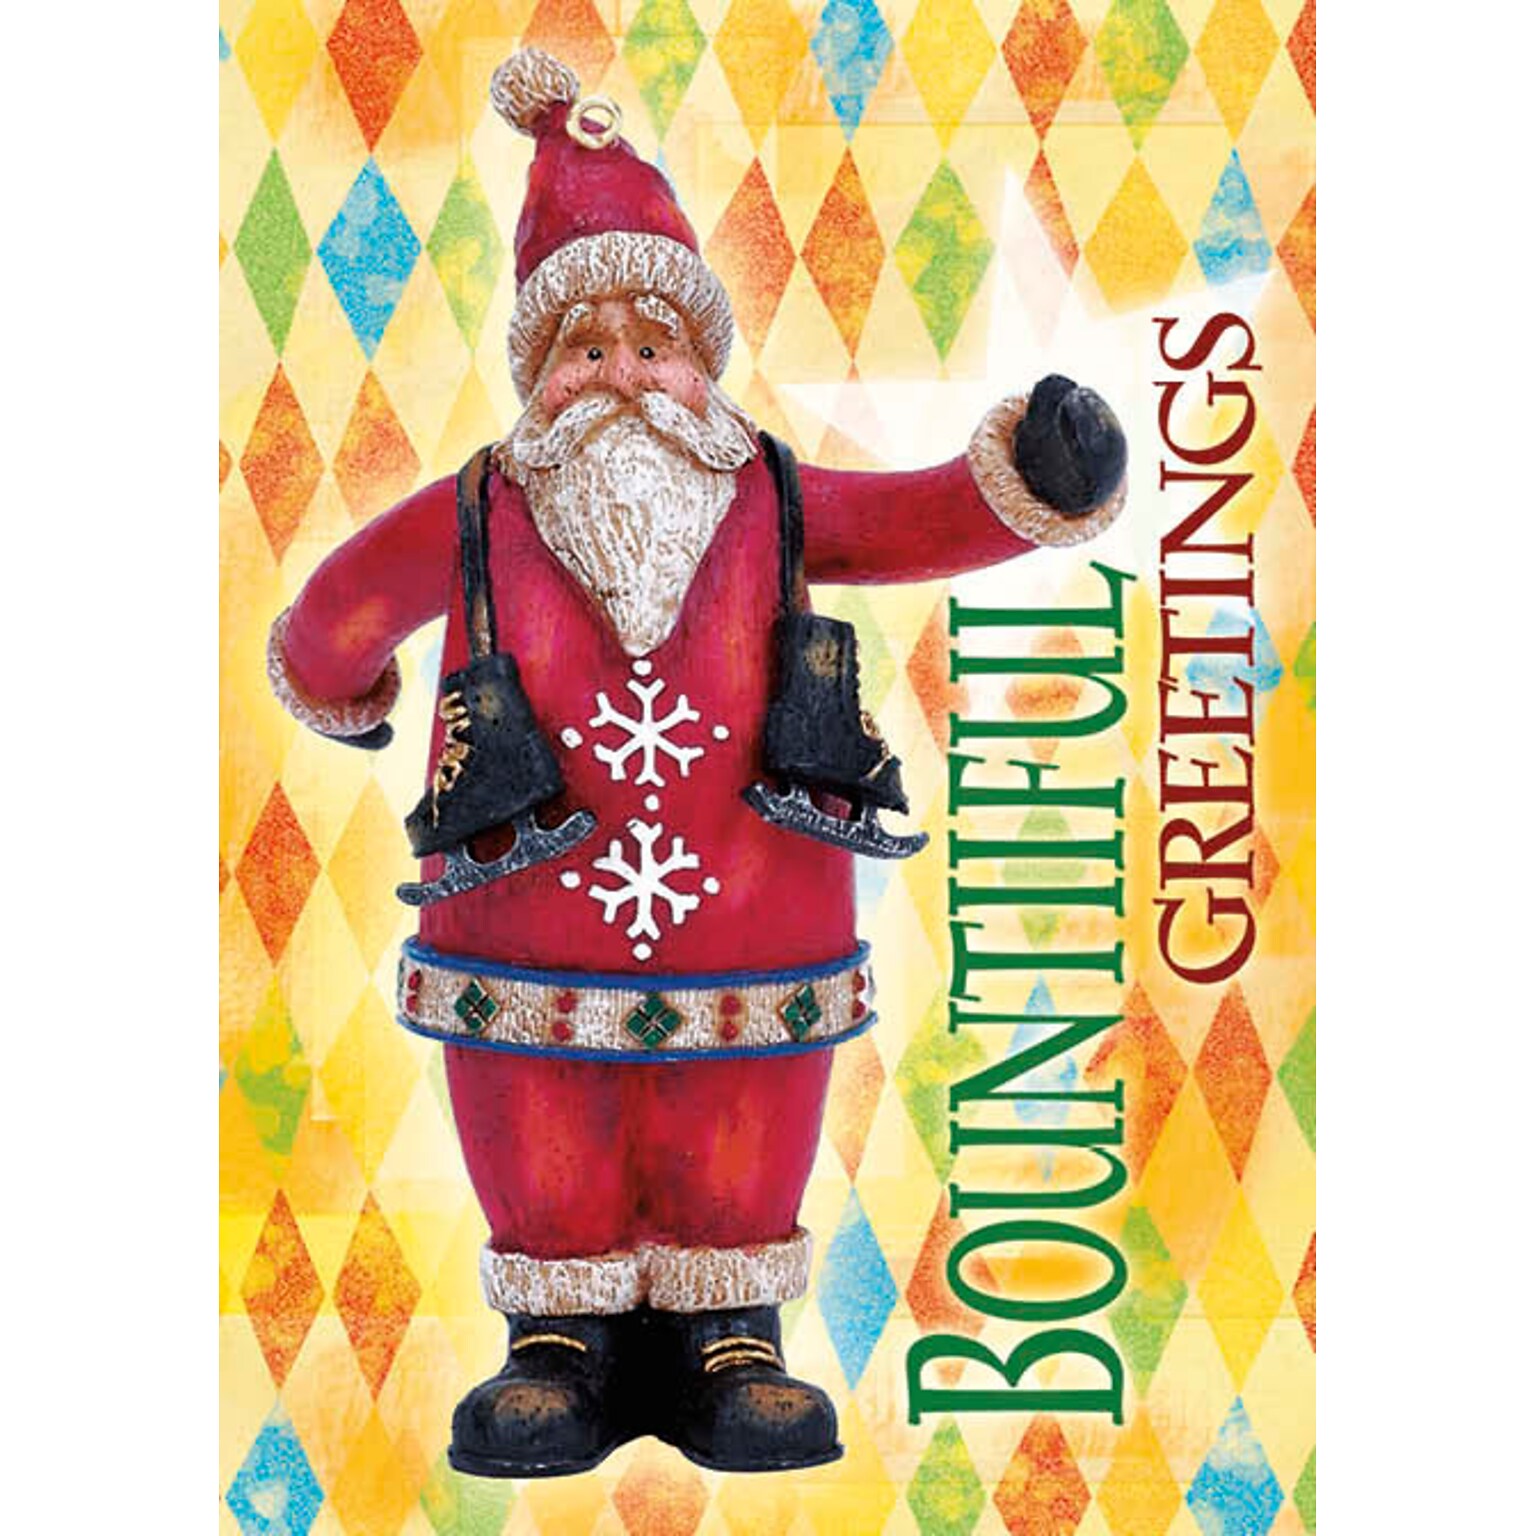 Bountiful Greetings Vintage Santa Christmas Greeting Cards, With A7 Envelopes, 7 x 5, 25 Cards per Set